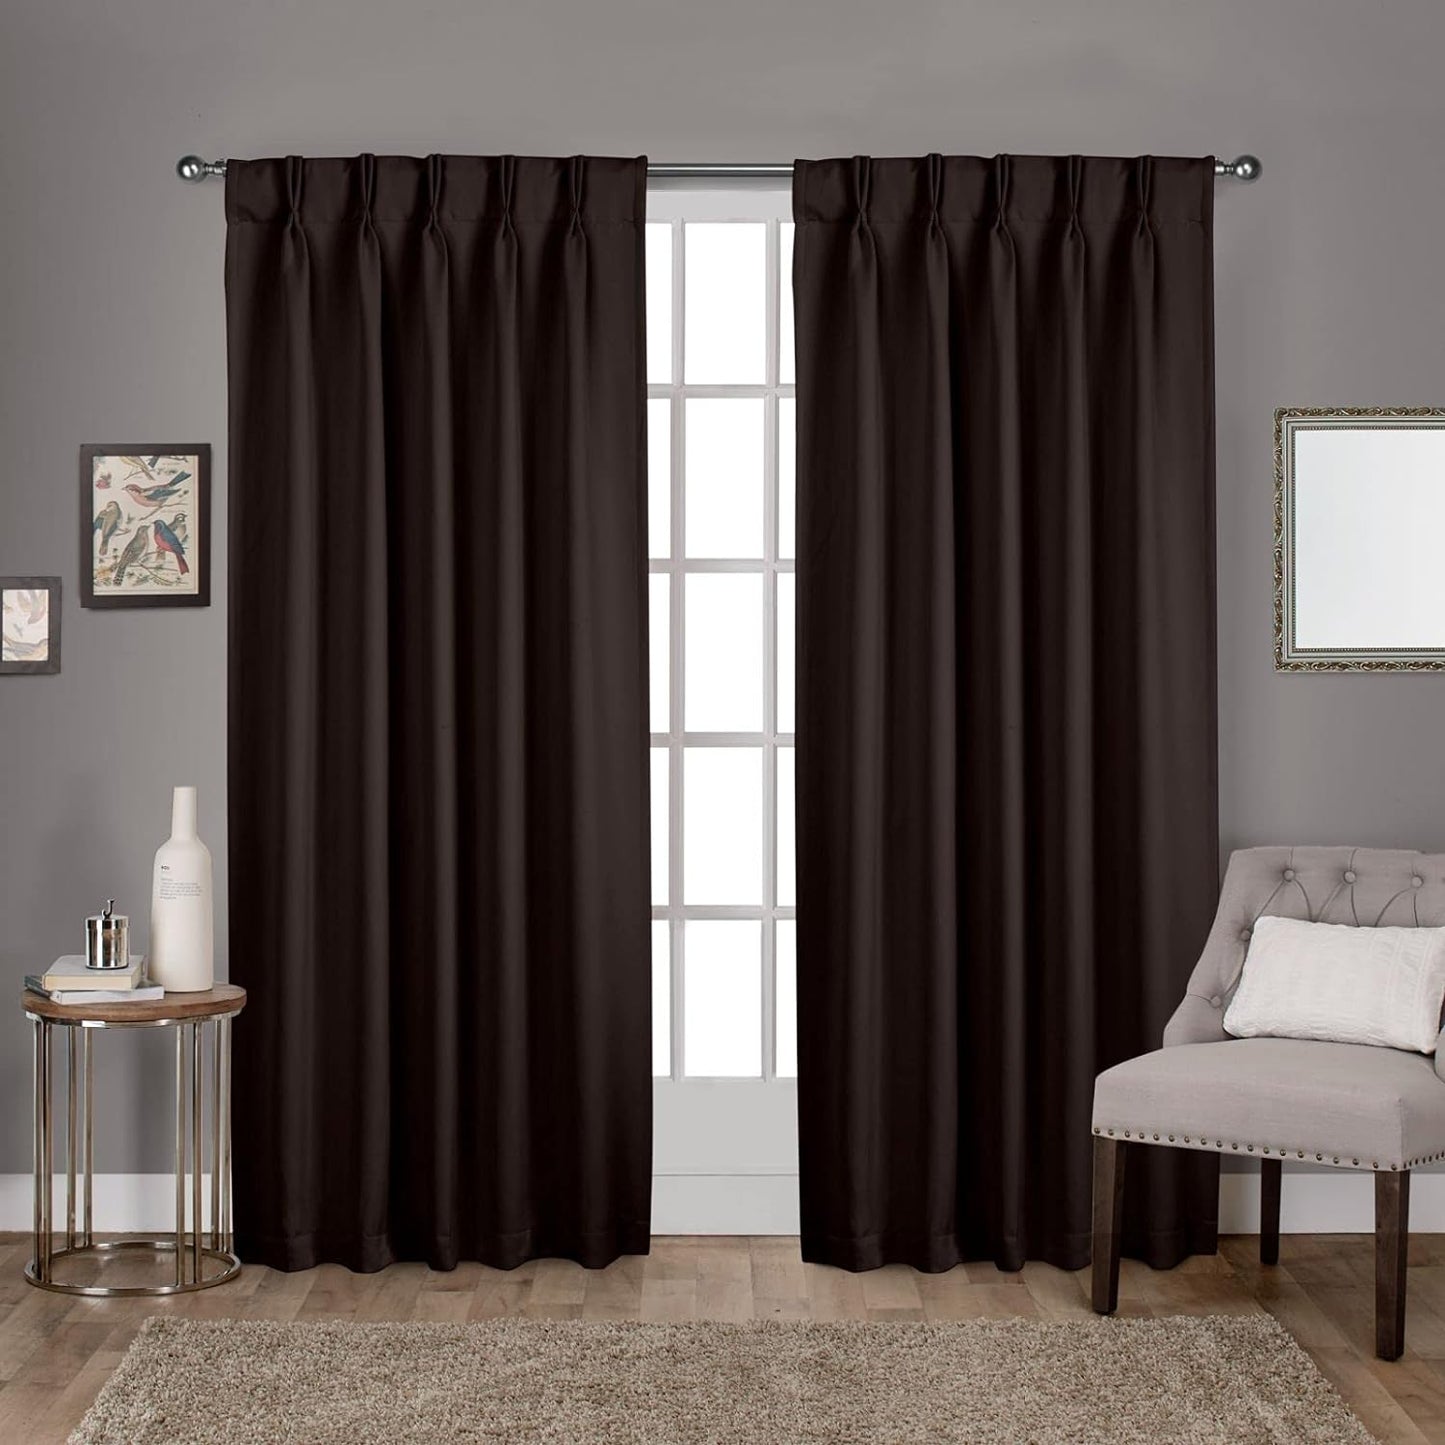 Exclusive Home Sateen Twill Woven Room Darkening Blackout Pinch Pleat/Hidden Tab Top Curtain Panel Pair, 108" Length, Vanilla  Exclusive Home Curtains Espresso 96" Length 